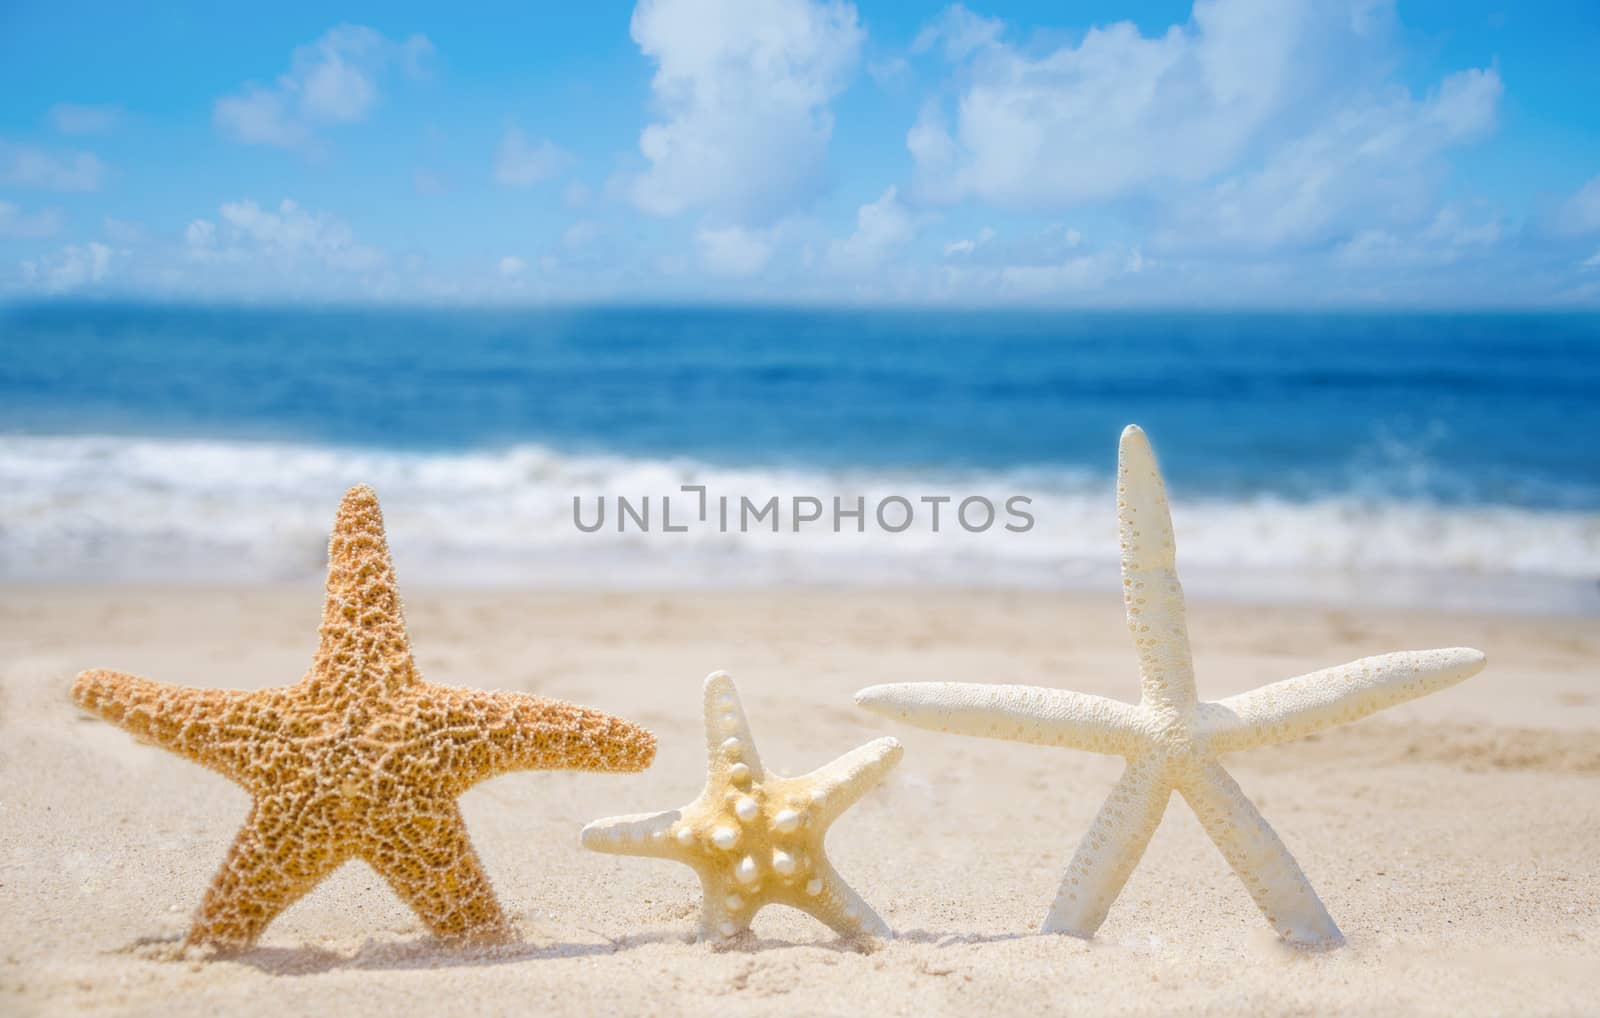 Three Starfishes on a sandy beach by the ocean